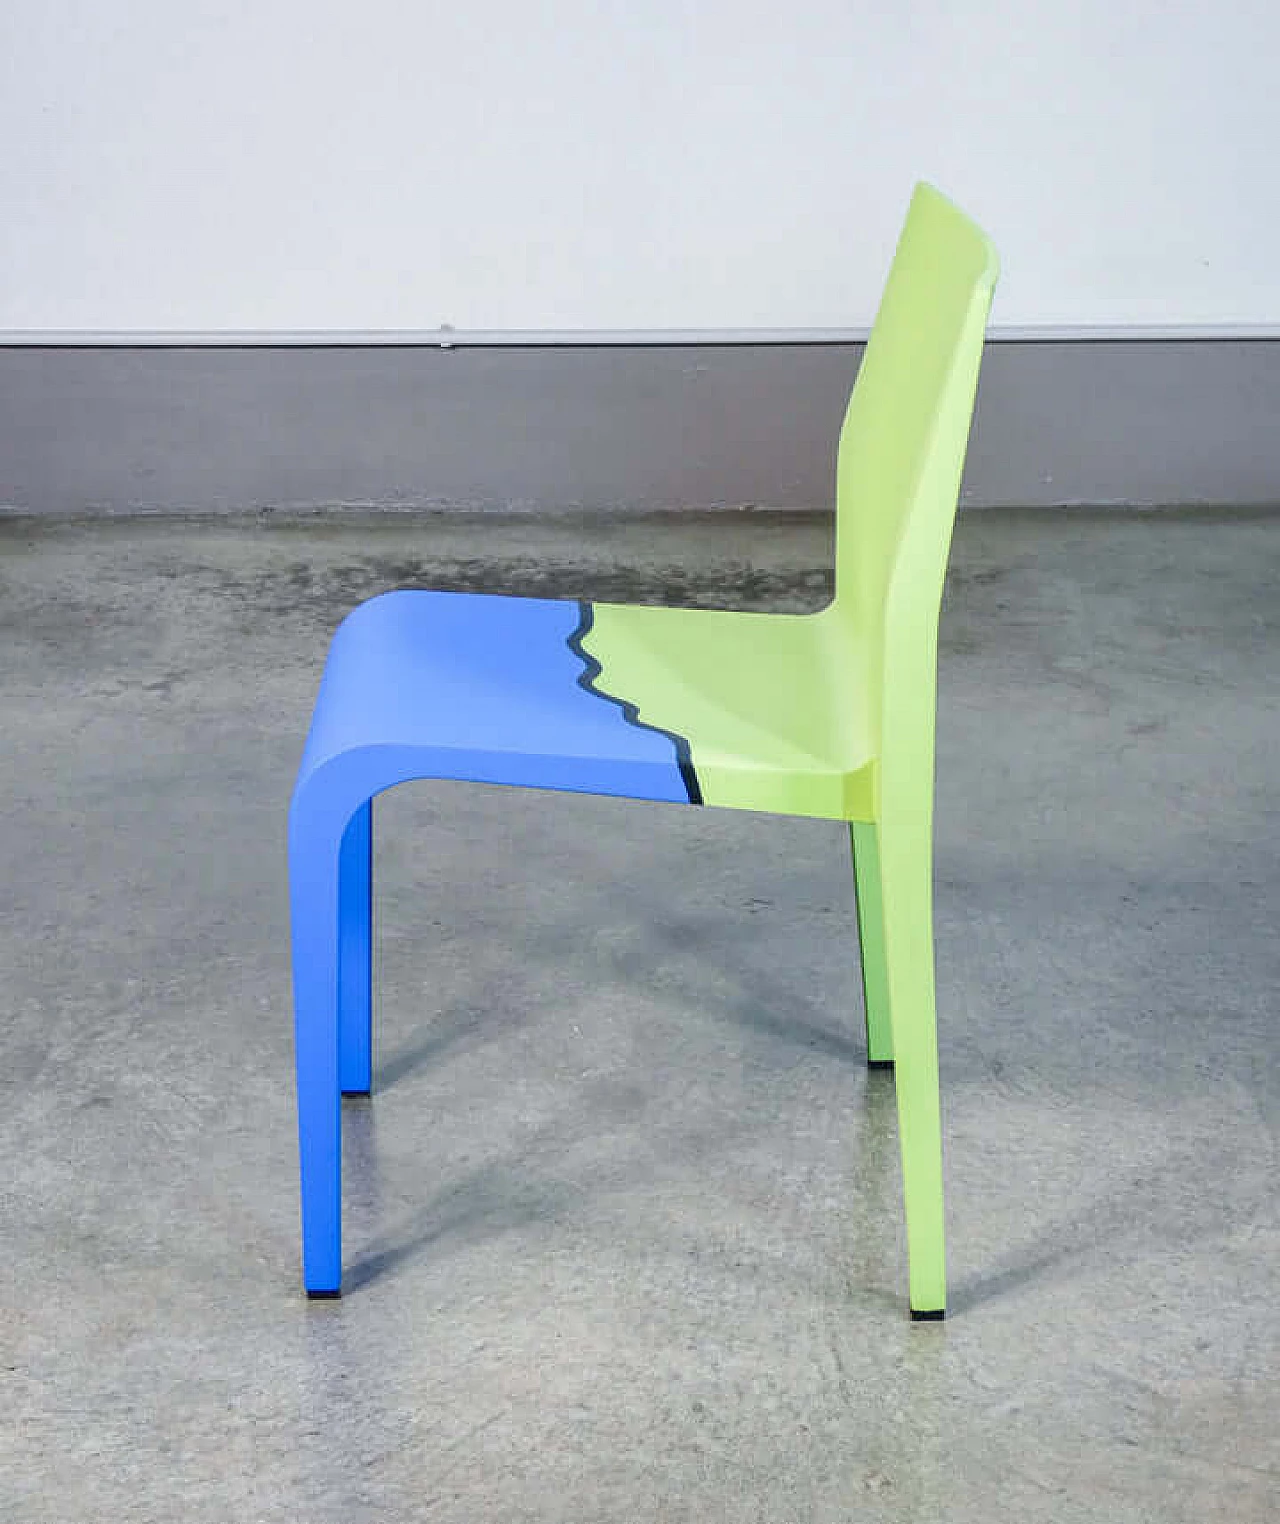 Laleggera 44 chair by Riccardo Blumer for Alias painted by Michelangelo Pistoletto, 2009 5